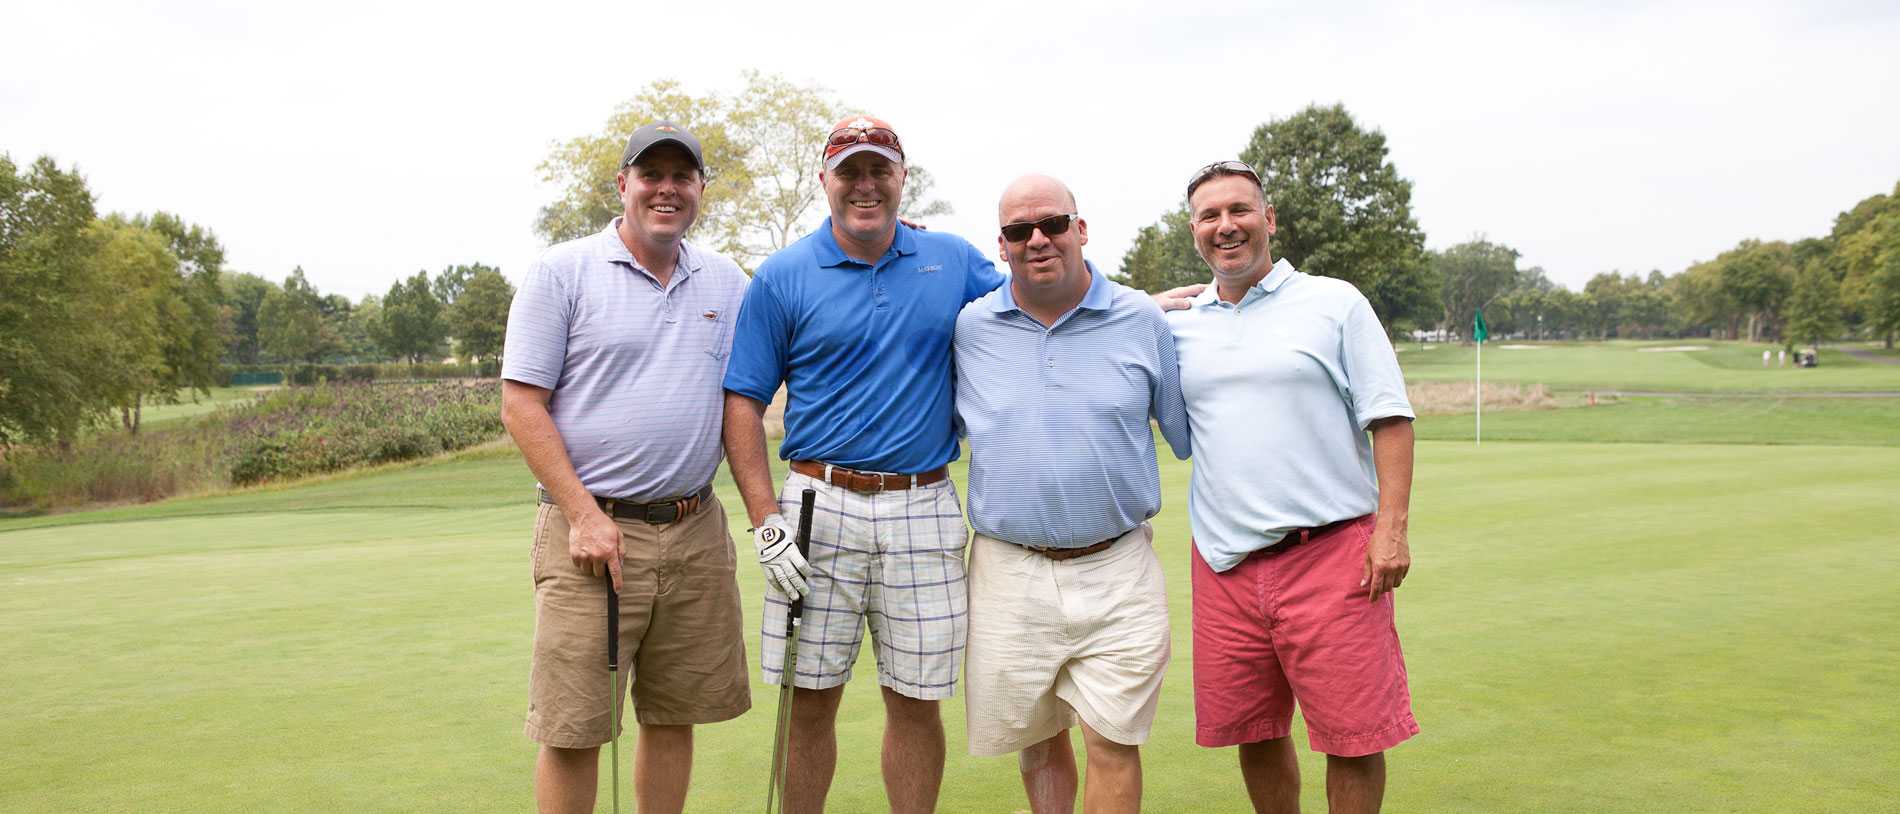 2023 Golf Classic – August 28th